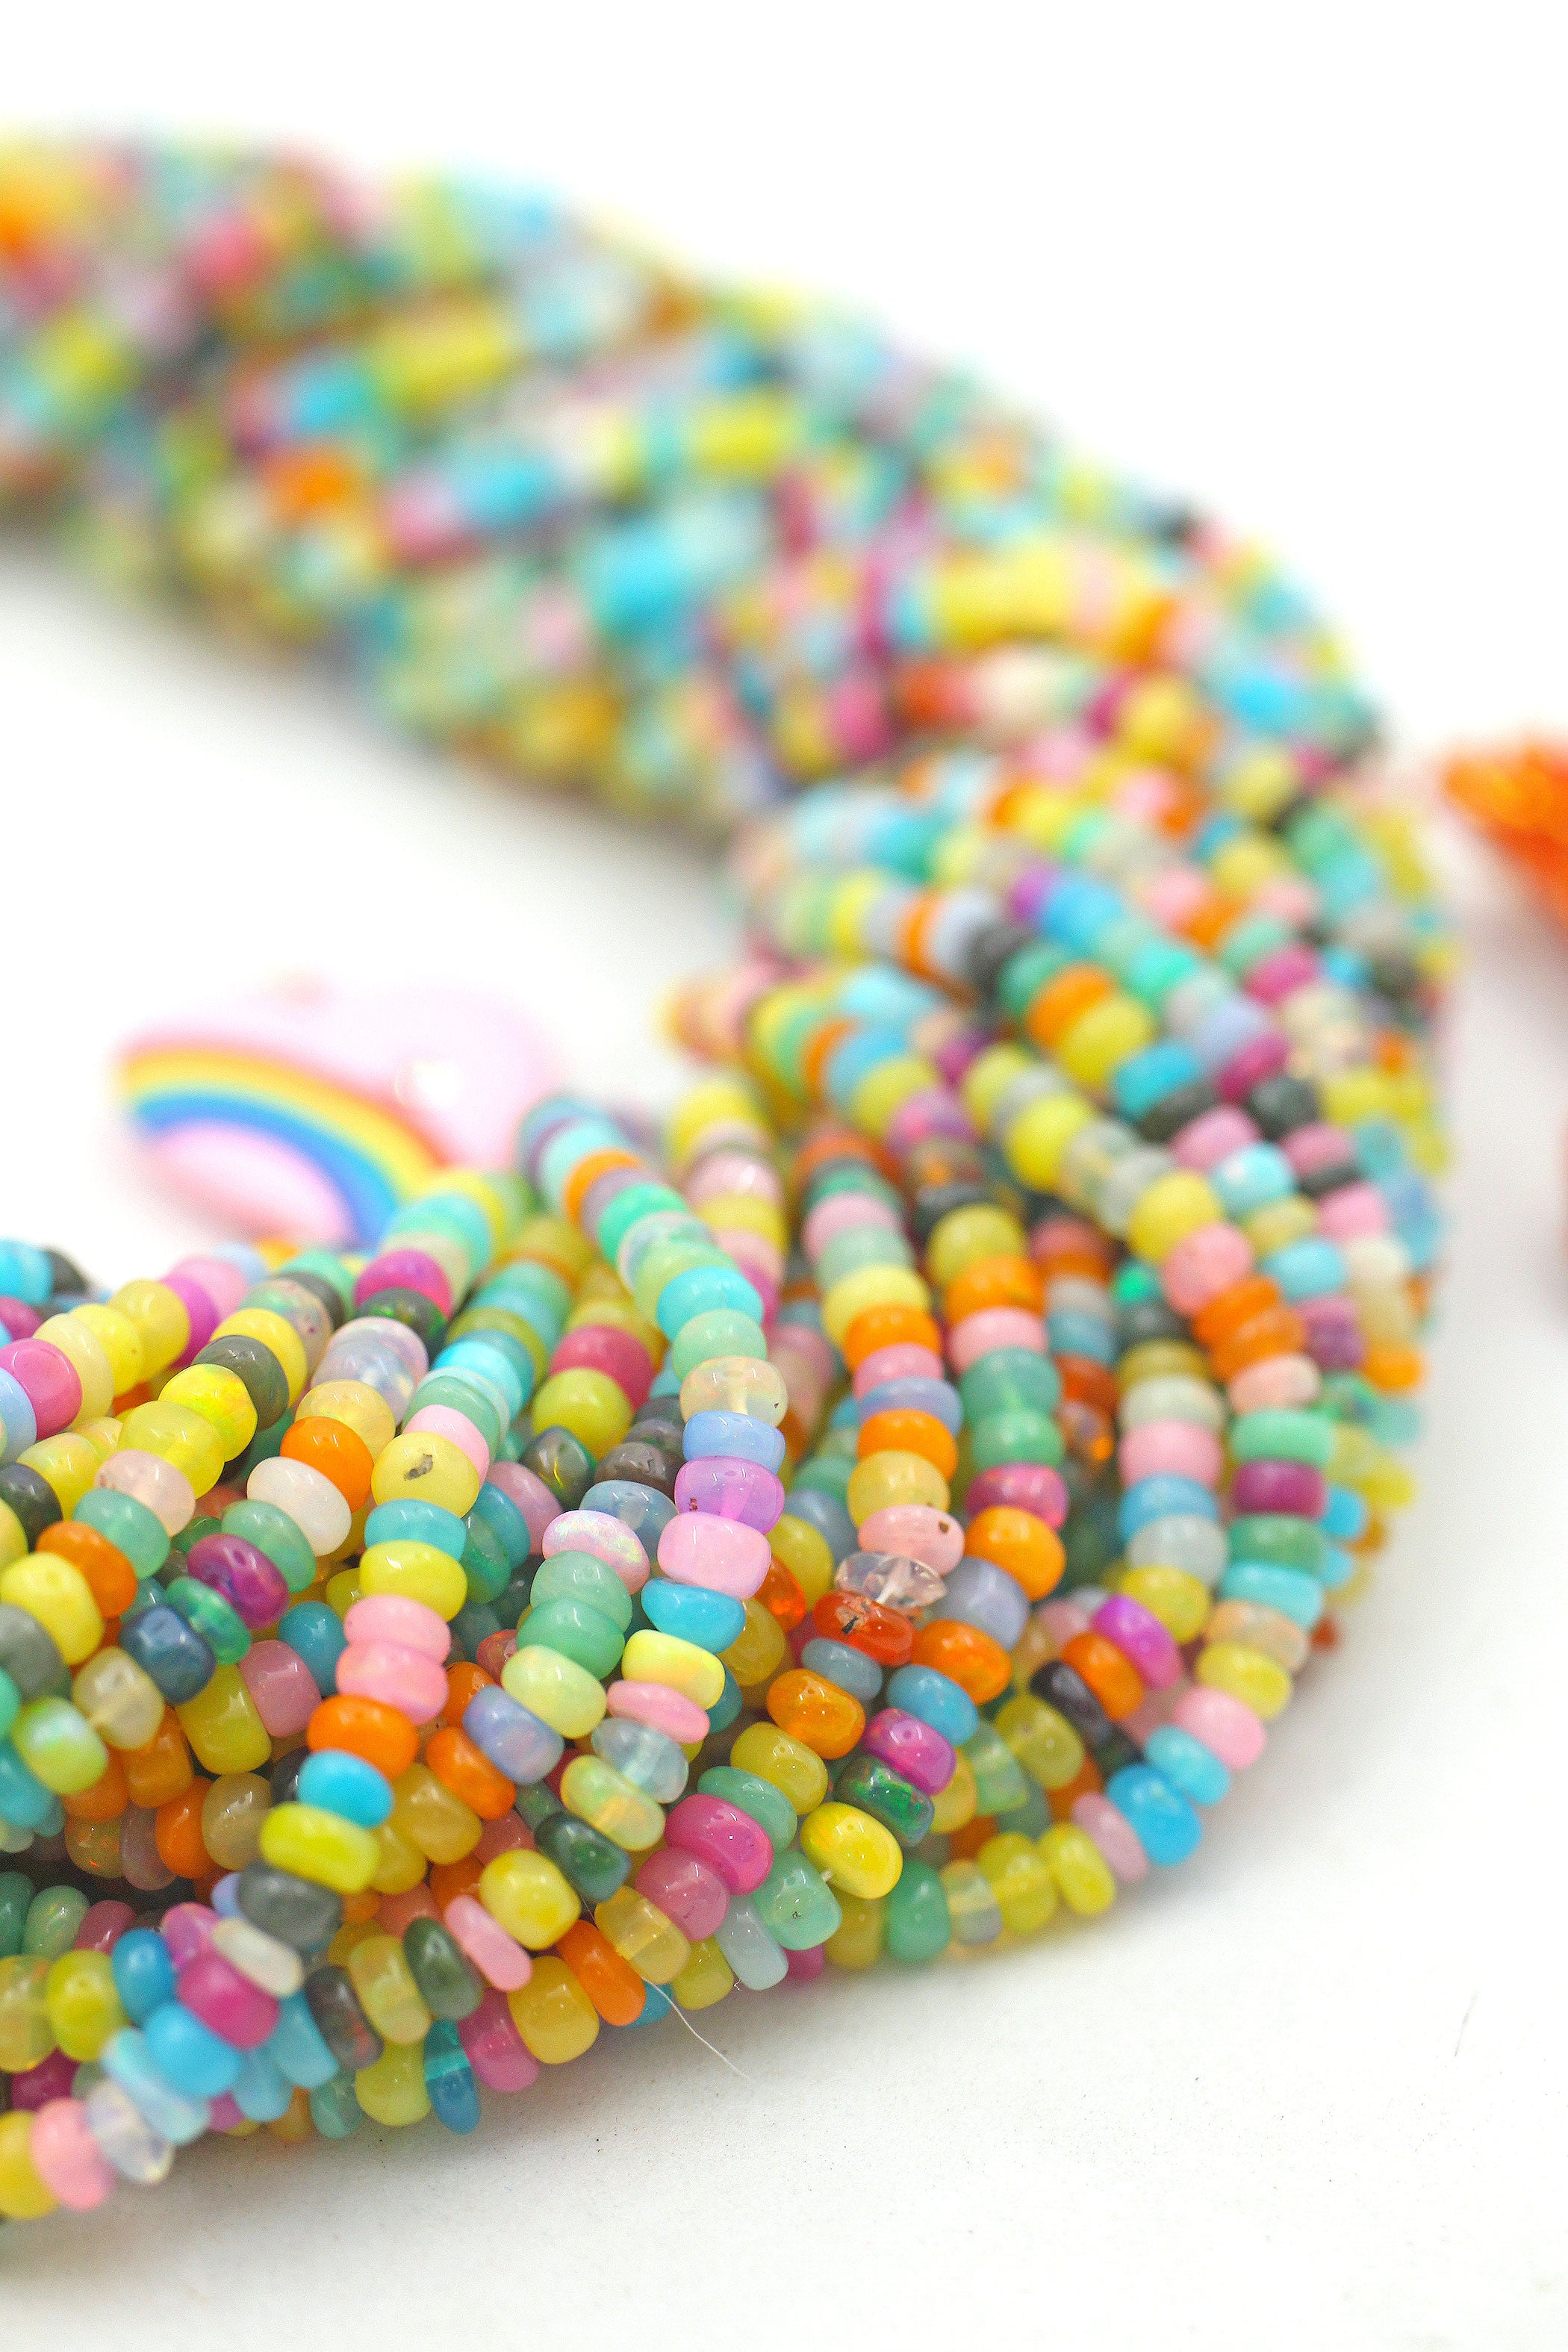 Shop Natural Multi Fire Ethiopian Opal Smooth Rondelle Beads